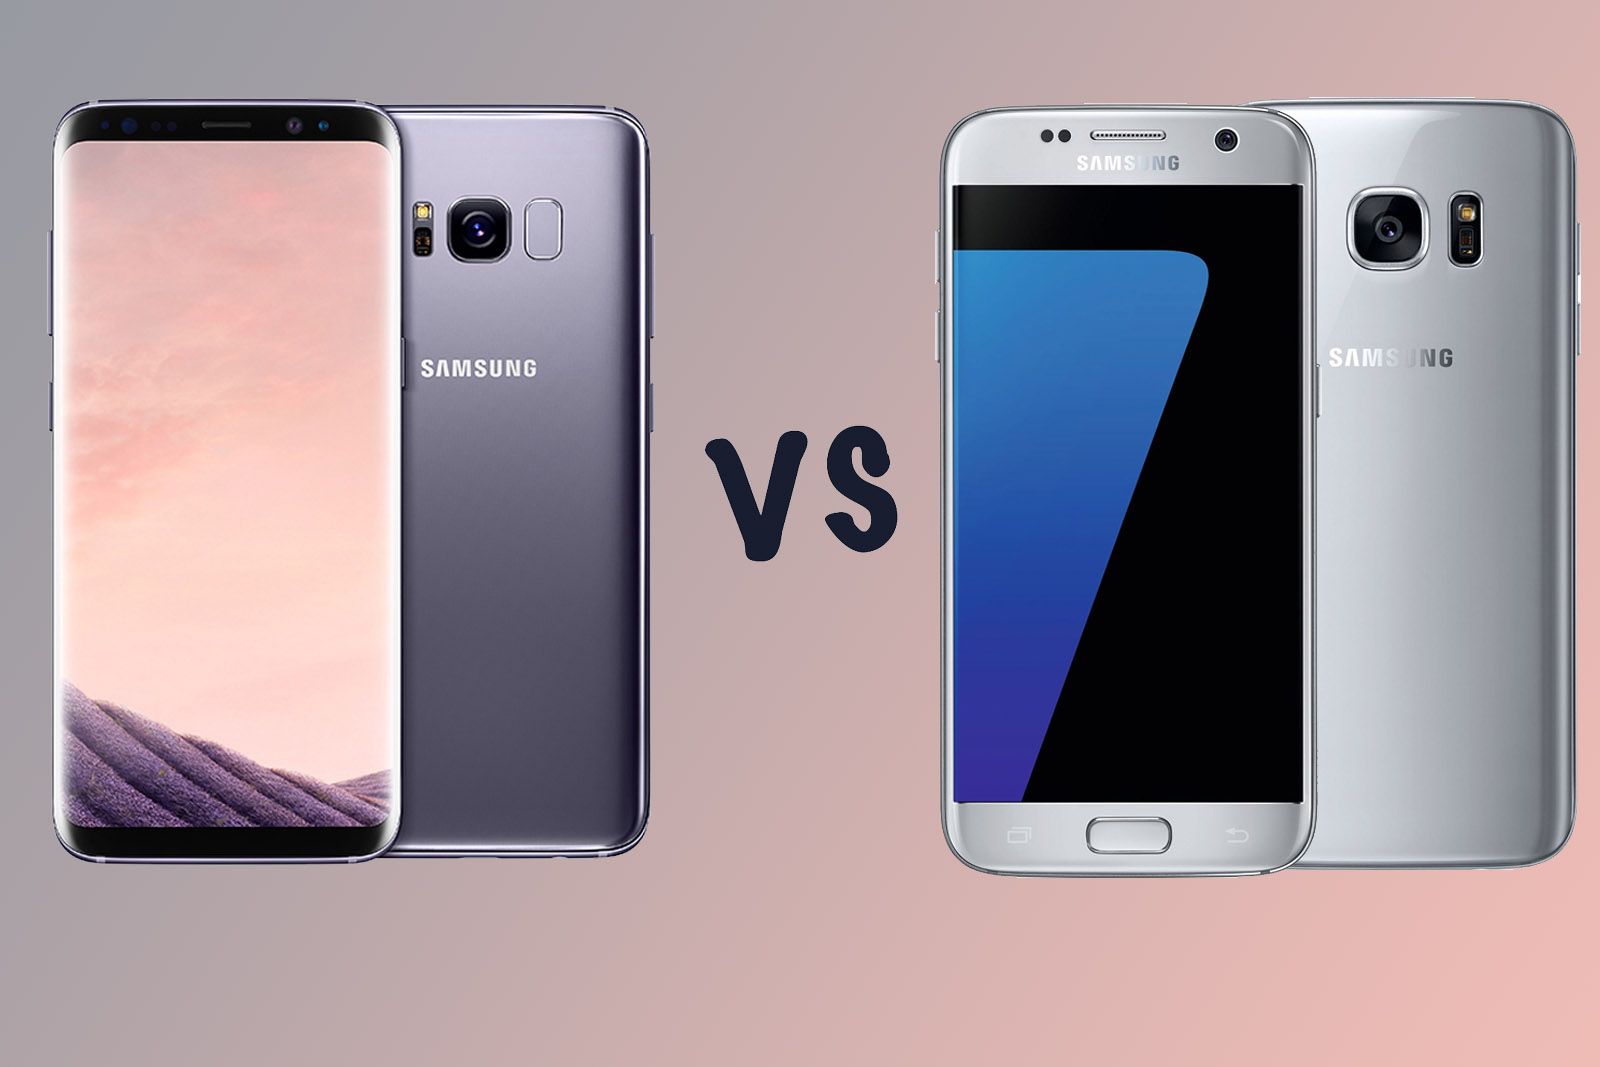 samsung galaxy s8 vs s8 plus vs galaxy s7 what s the difference image 1